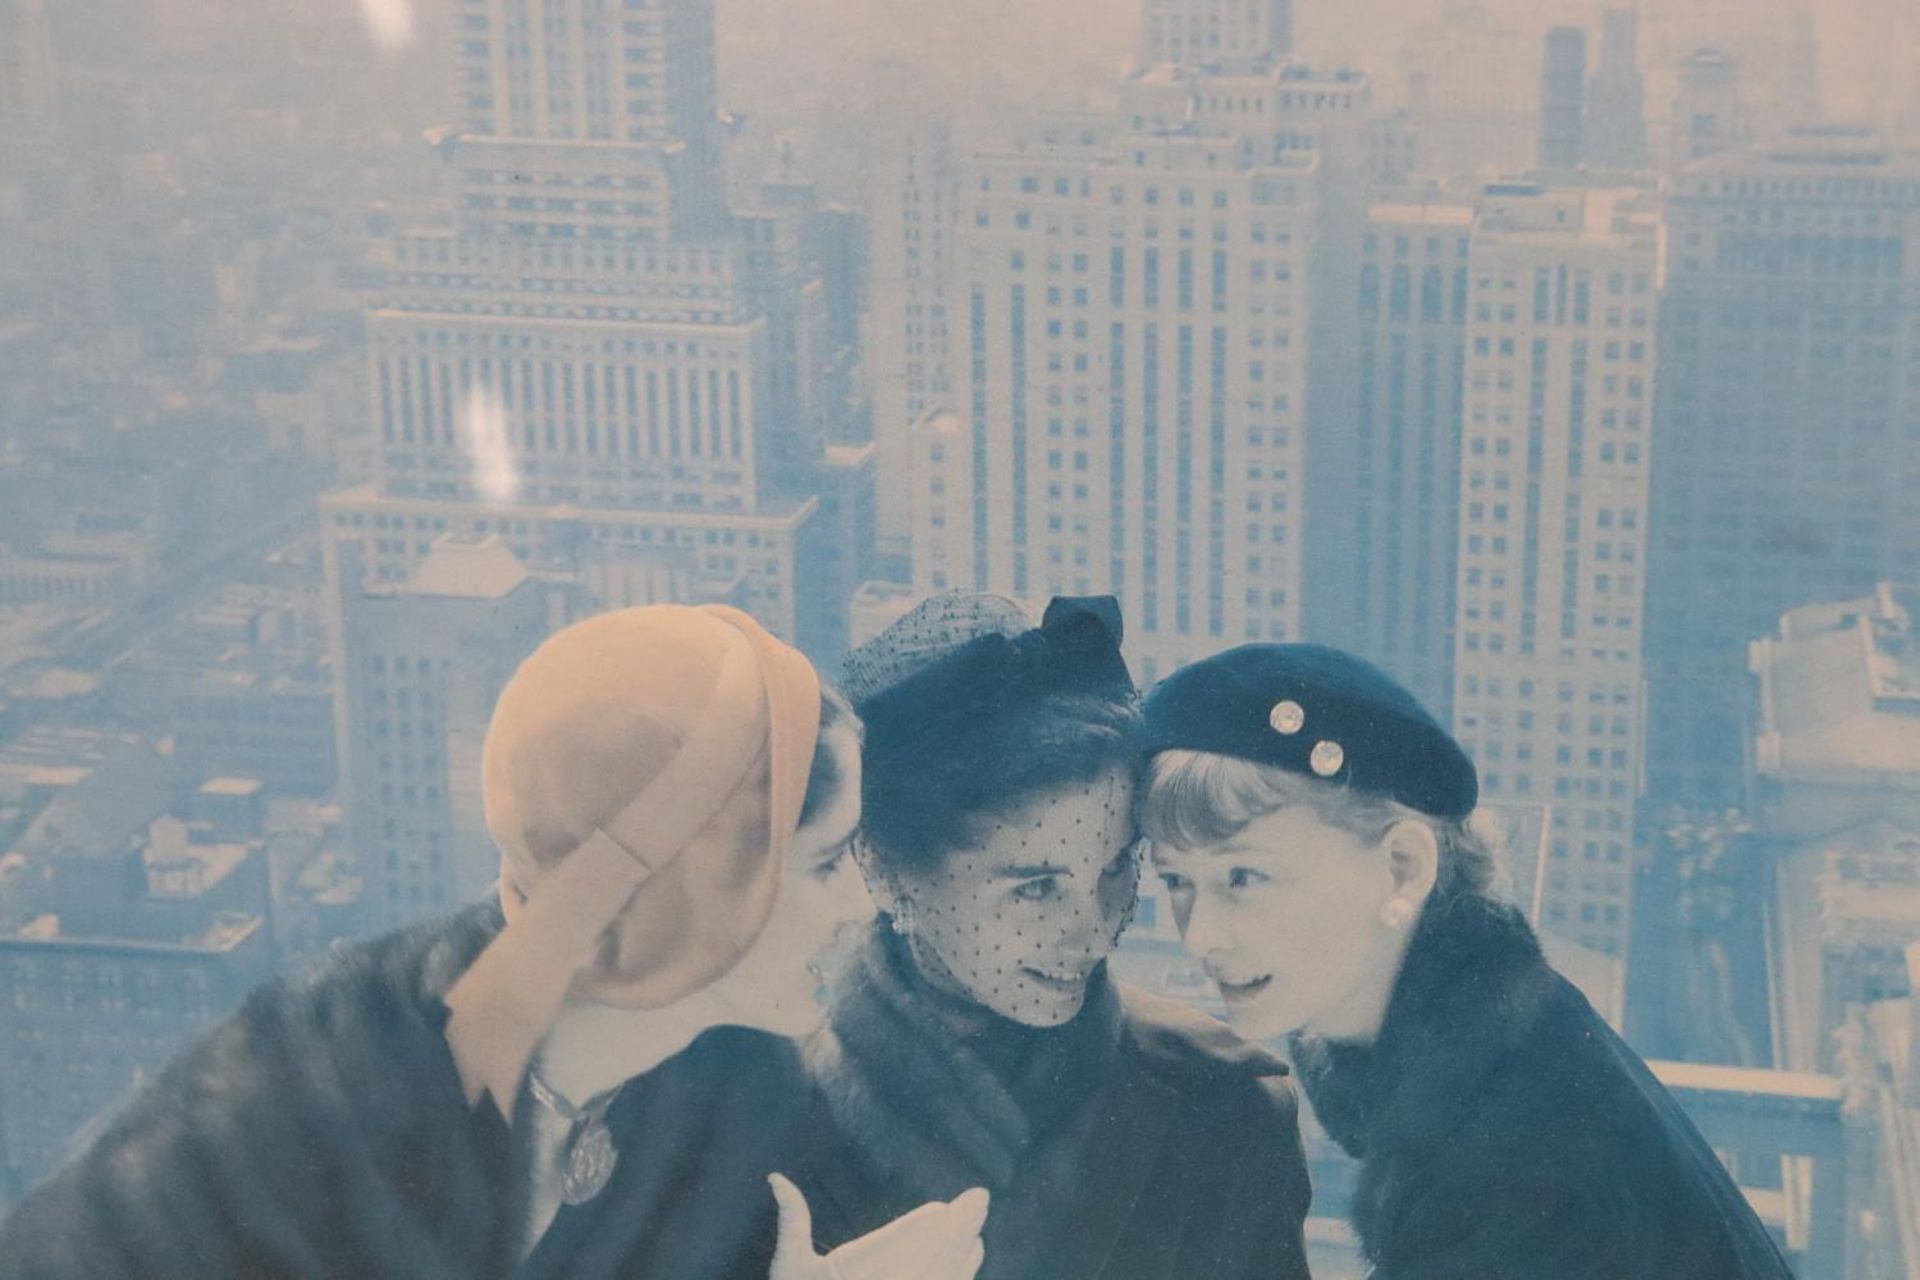 A NORMAN PARKINSON FRAMED PRINT 'HAT FASHIONS', THE NEW YORK SKYLINE FROM THE ROOF OF THE CONDE NAST - Image 3 of 3